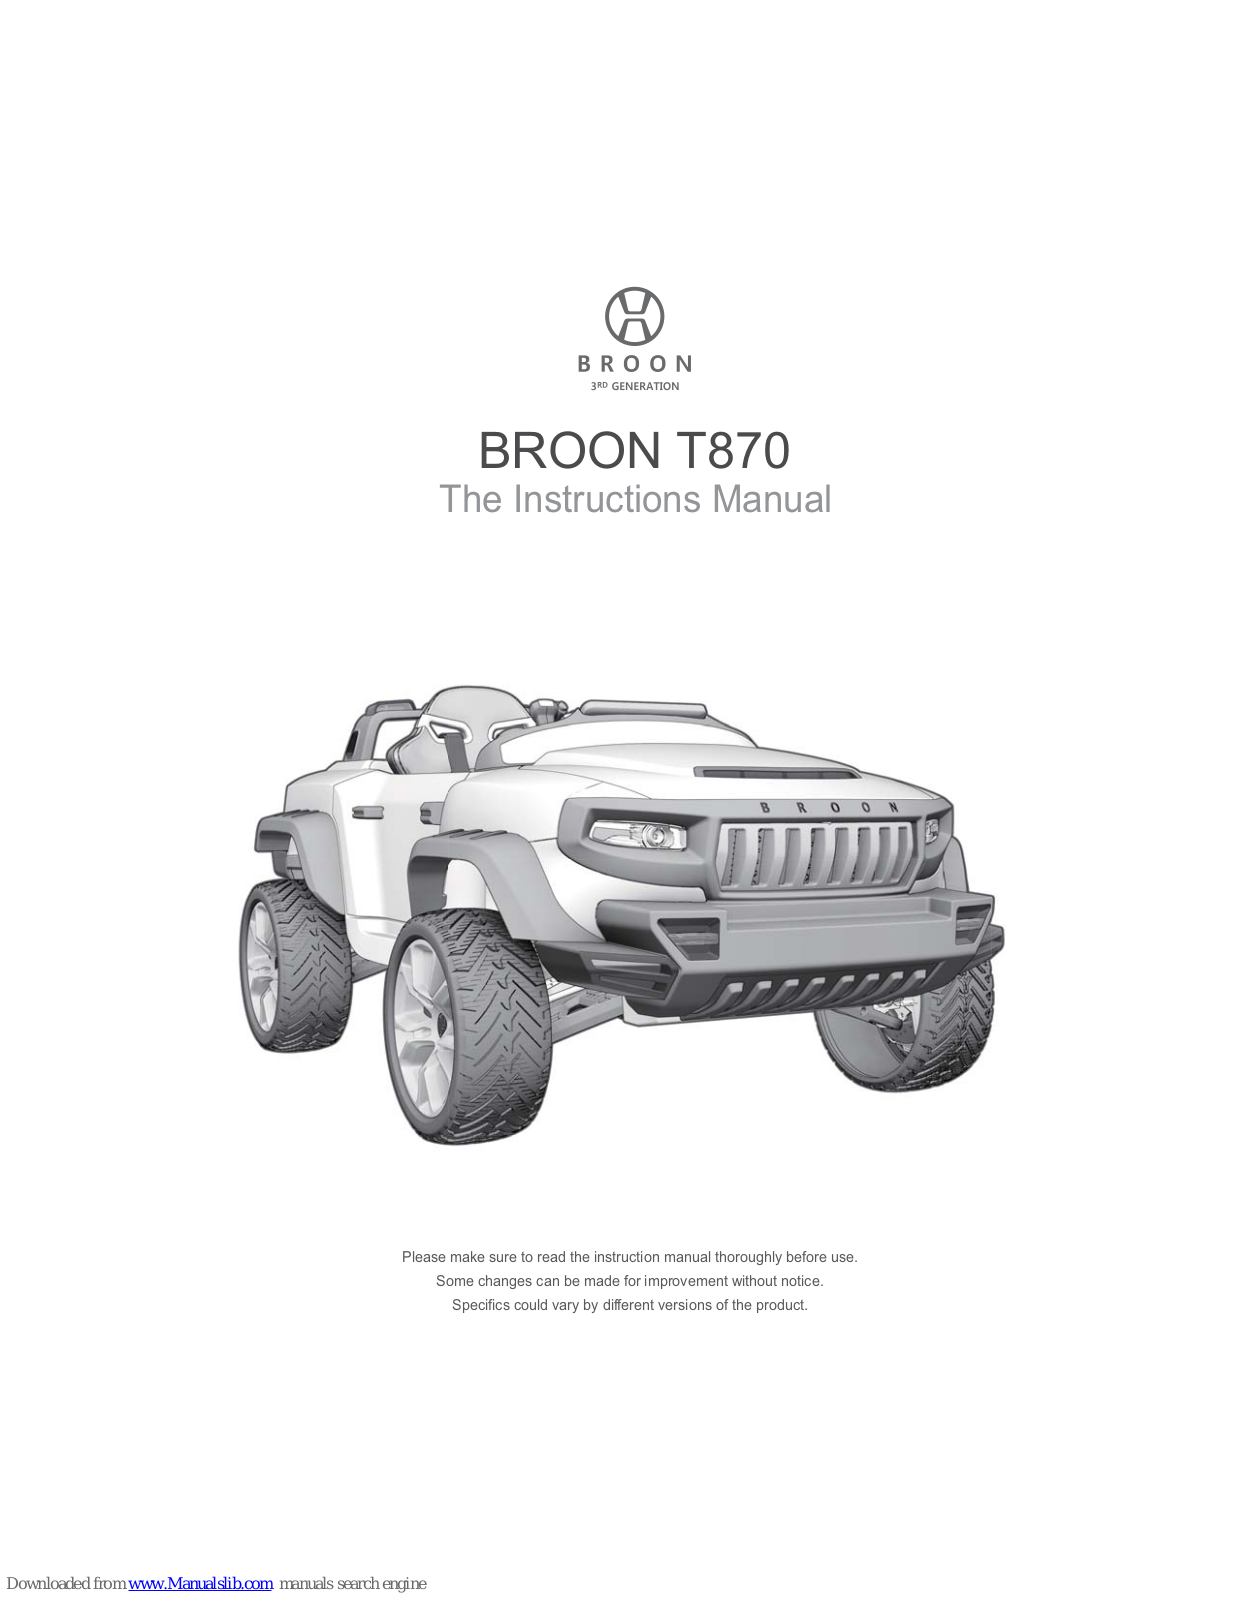 Broon T870 Instruction Manual